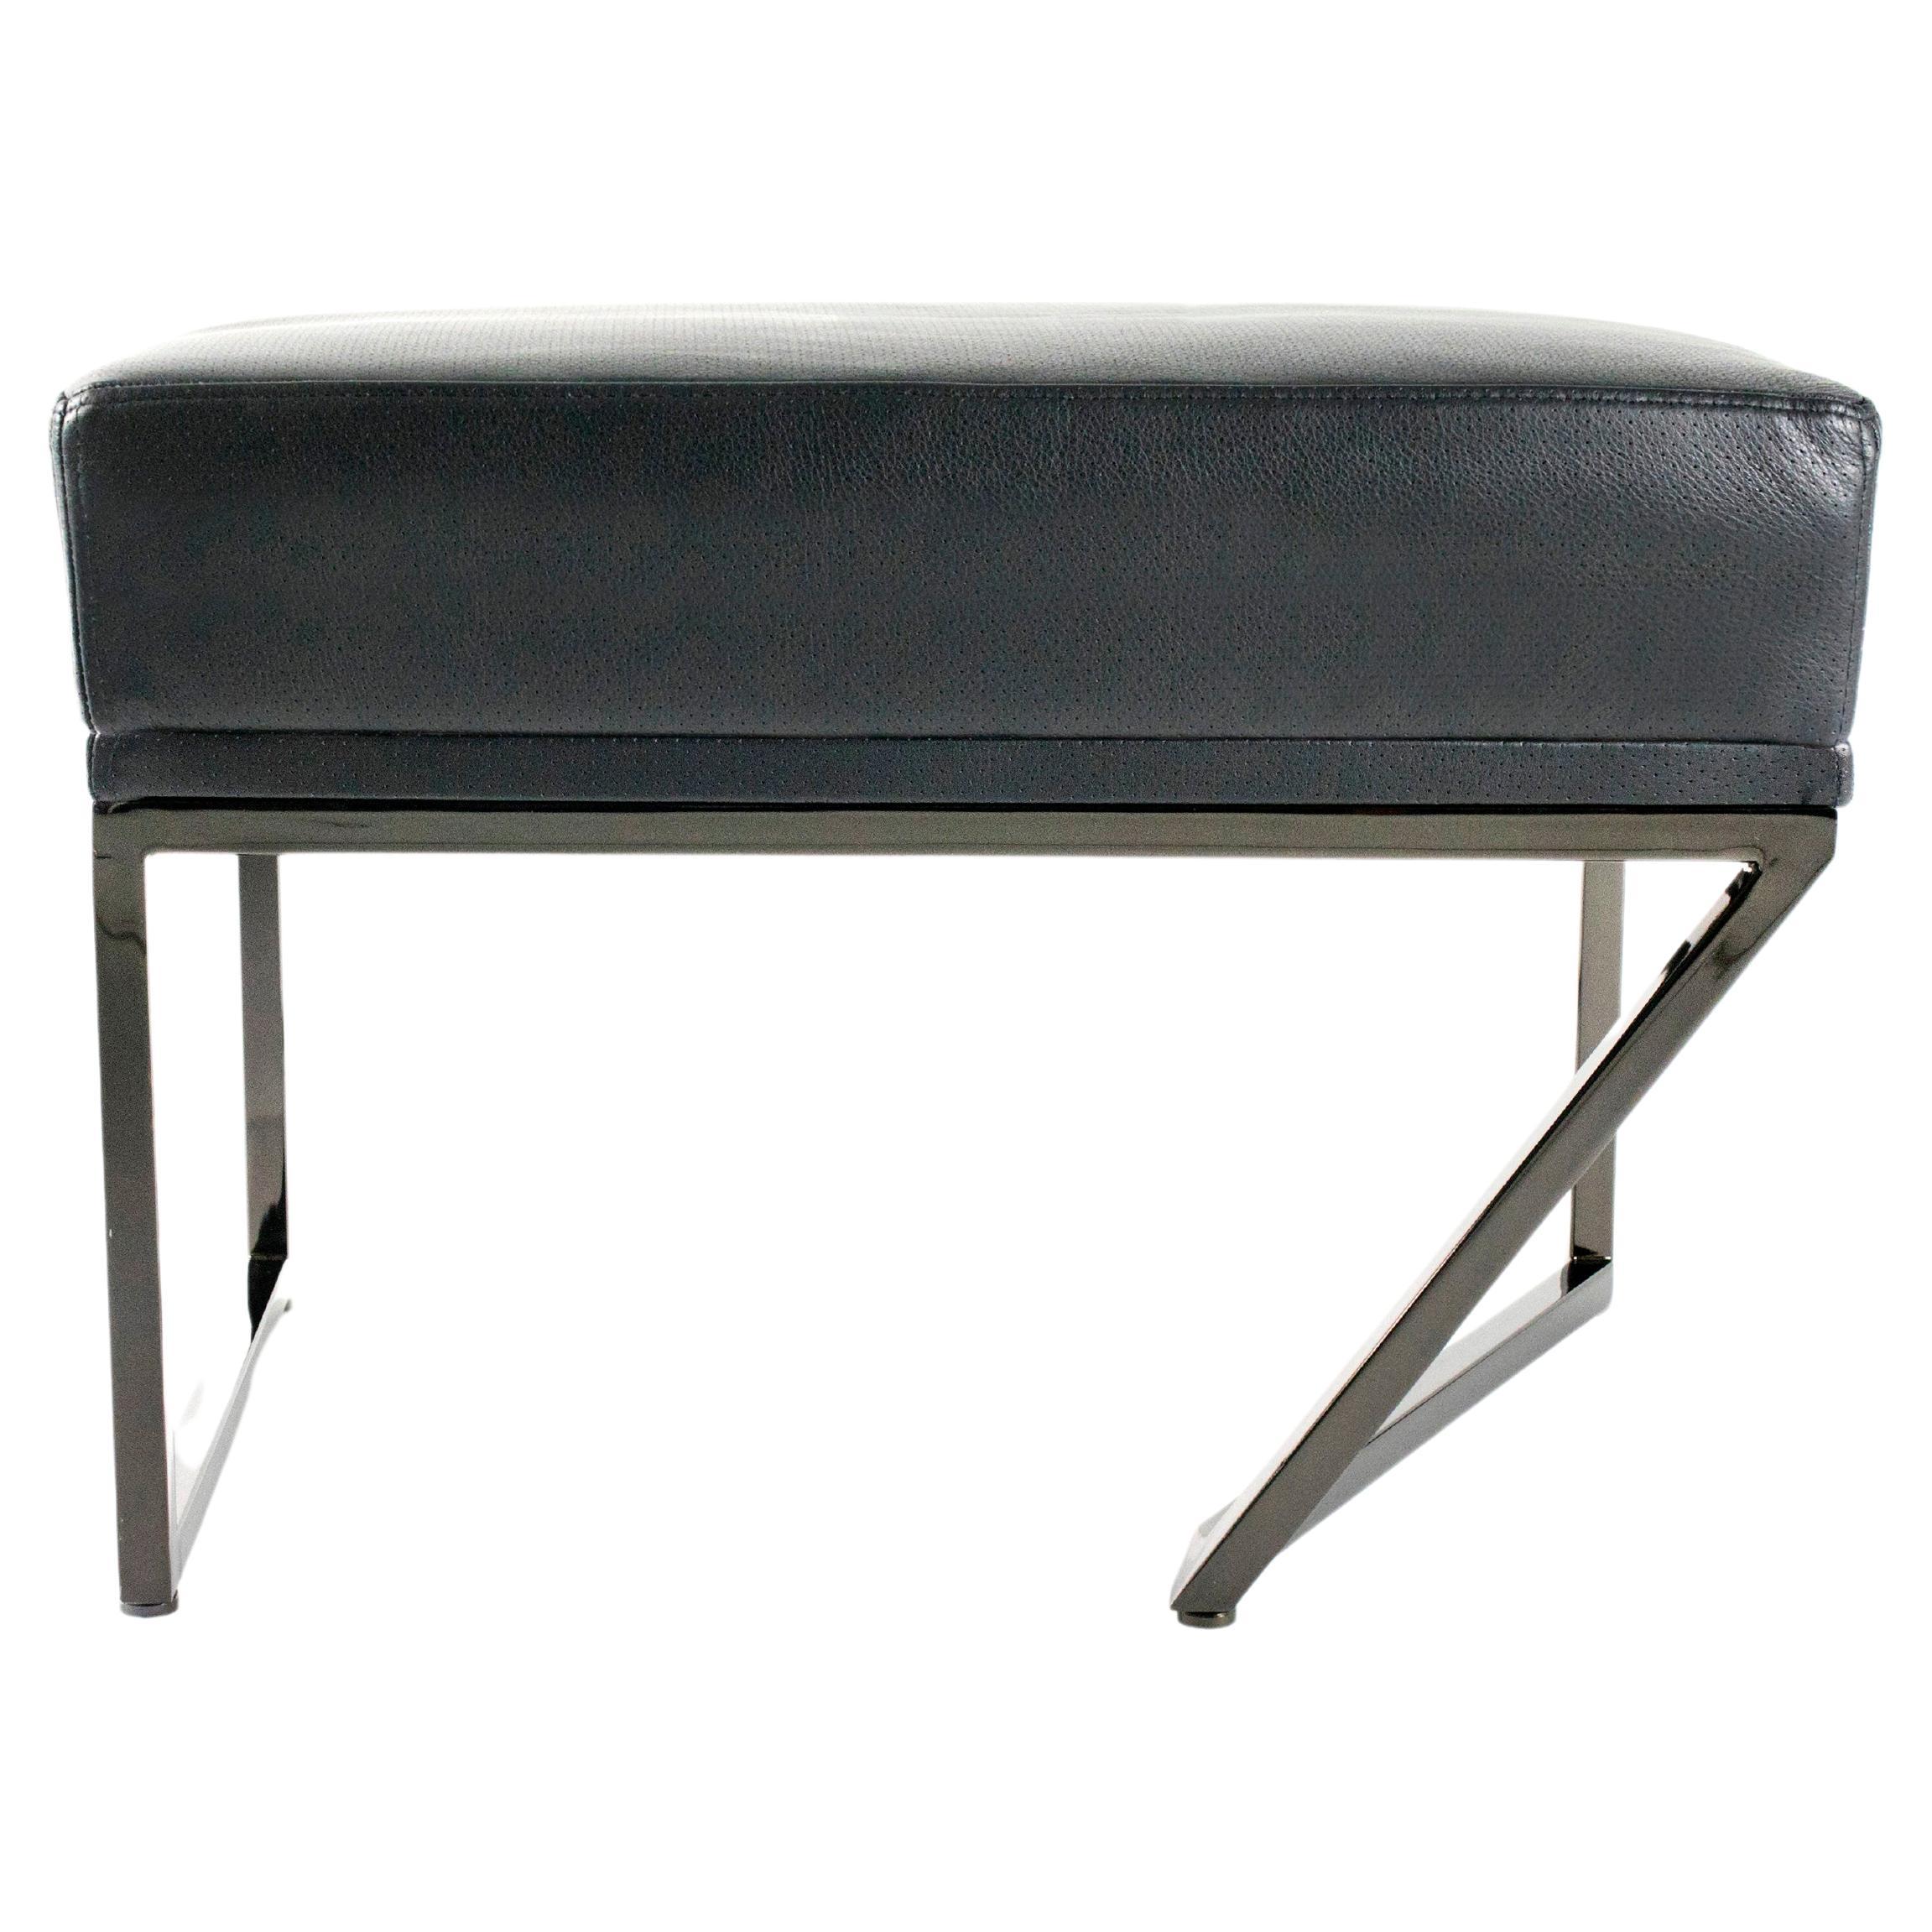 Upholstered Bench Black Nickel Plated For Sale